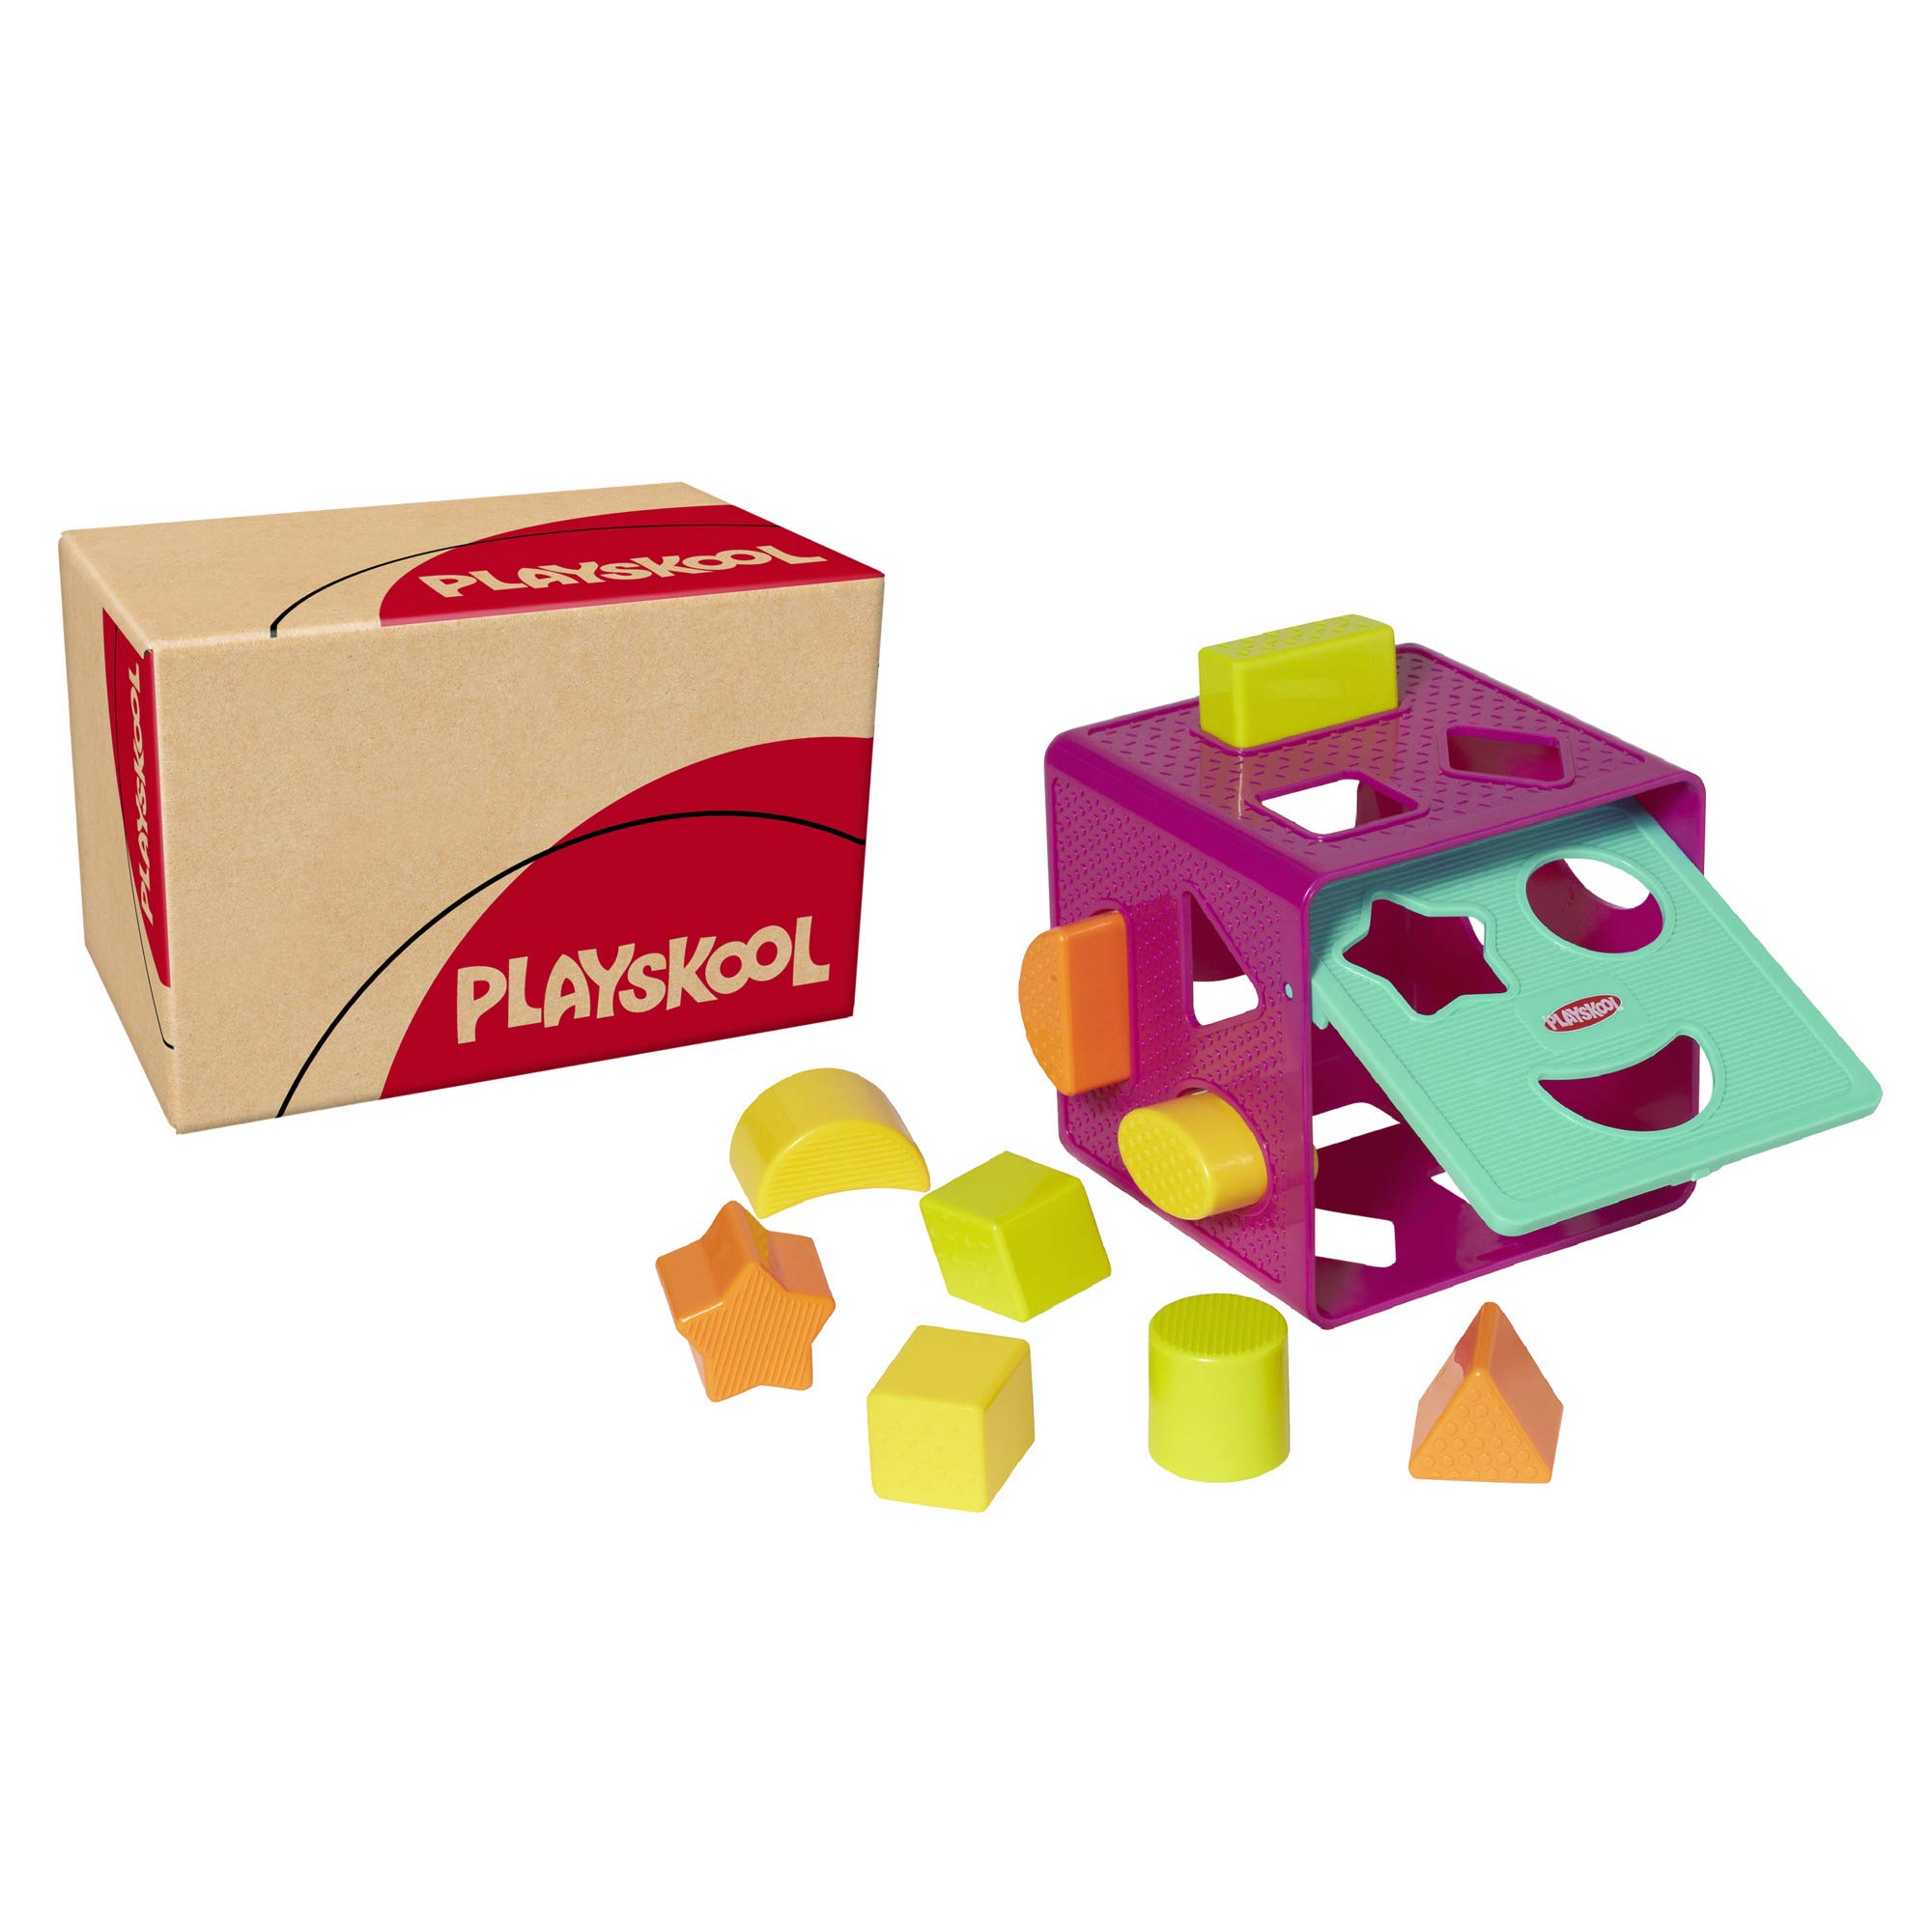 Playskool Form Fitter Shape Sorter Matching Activity Cube Toy with 9 Shapes for Toddlers and Kids 18 Months and Up (Amazon Exclusive)